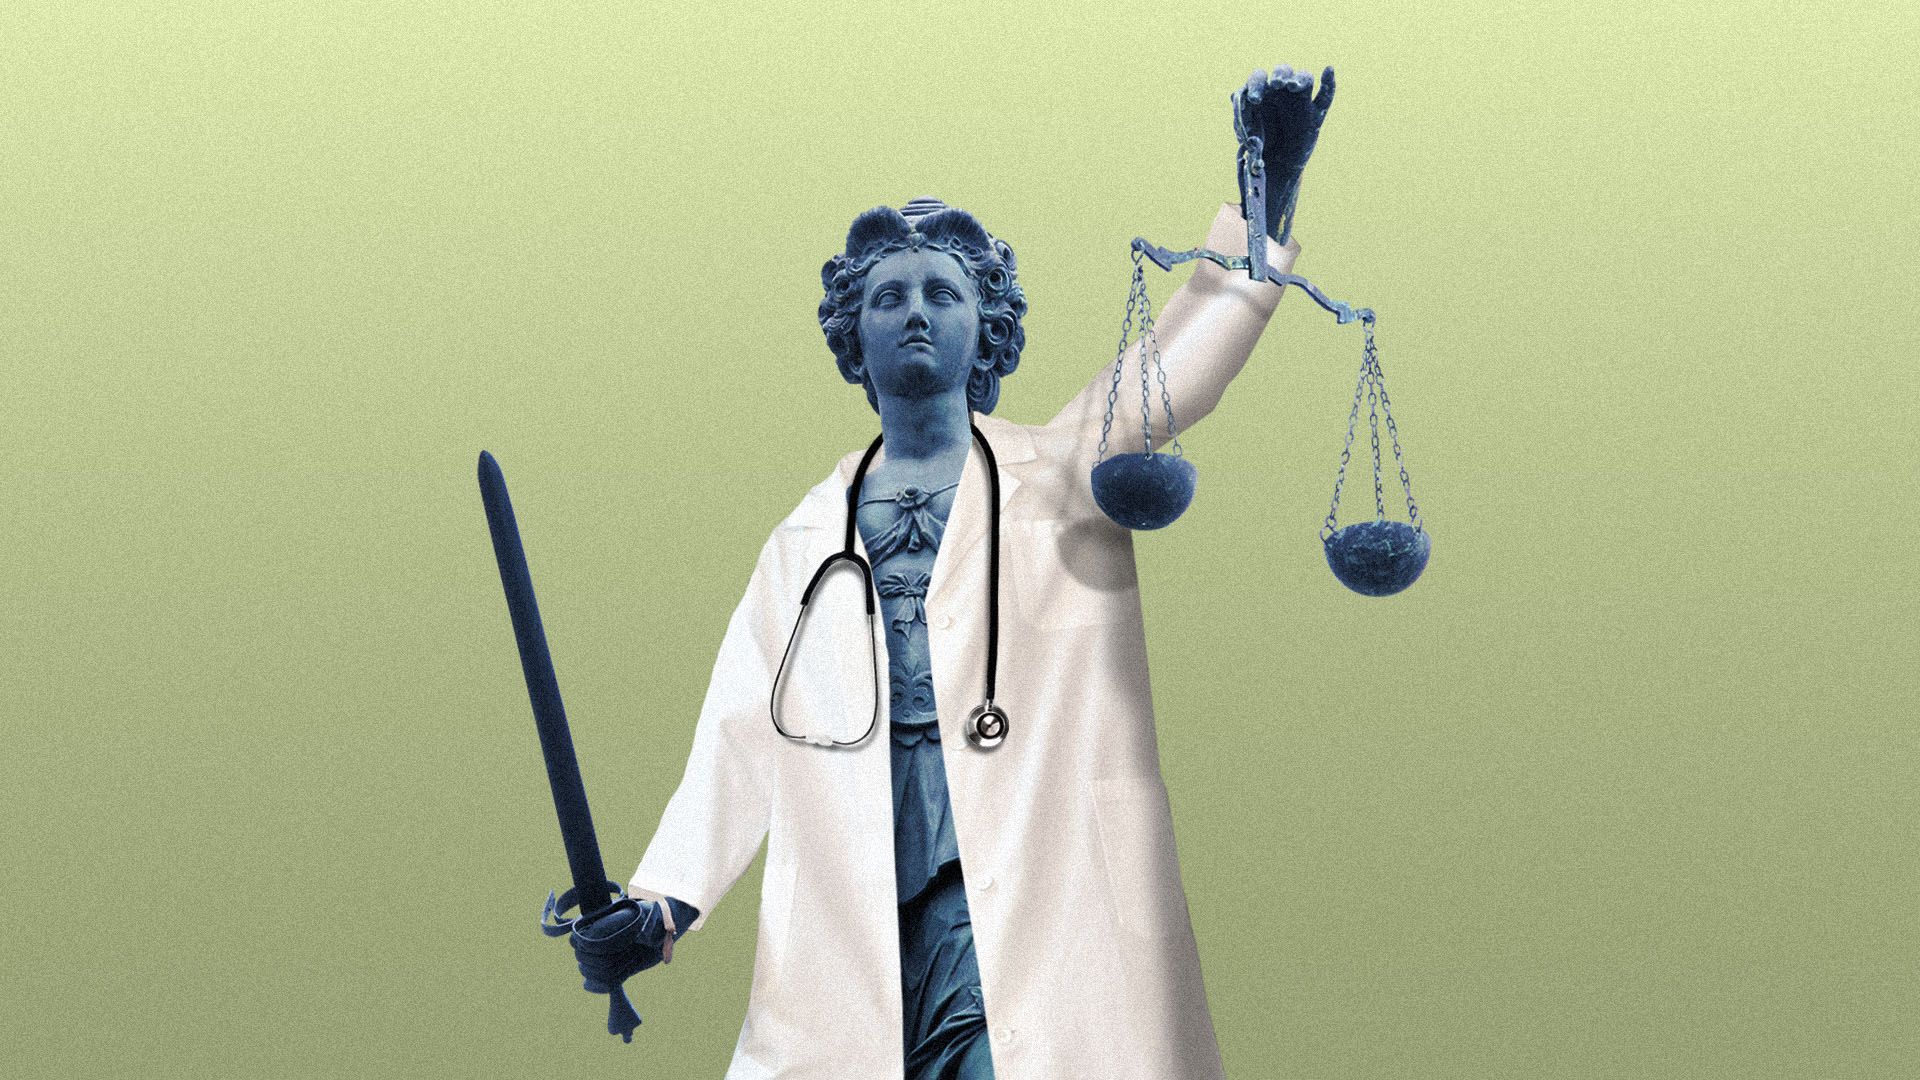 Illustration of a statue of Justice wearing a doctor's coat and a stethoscope.